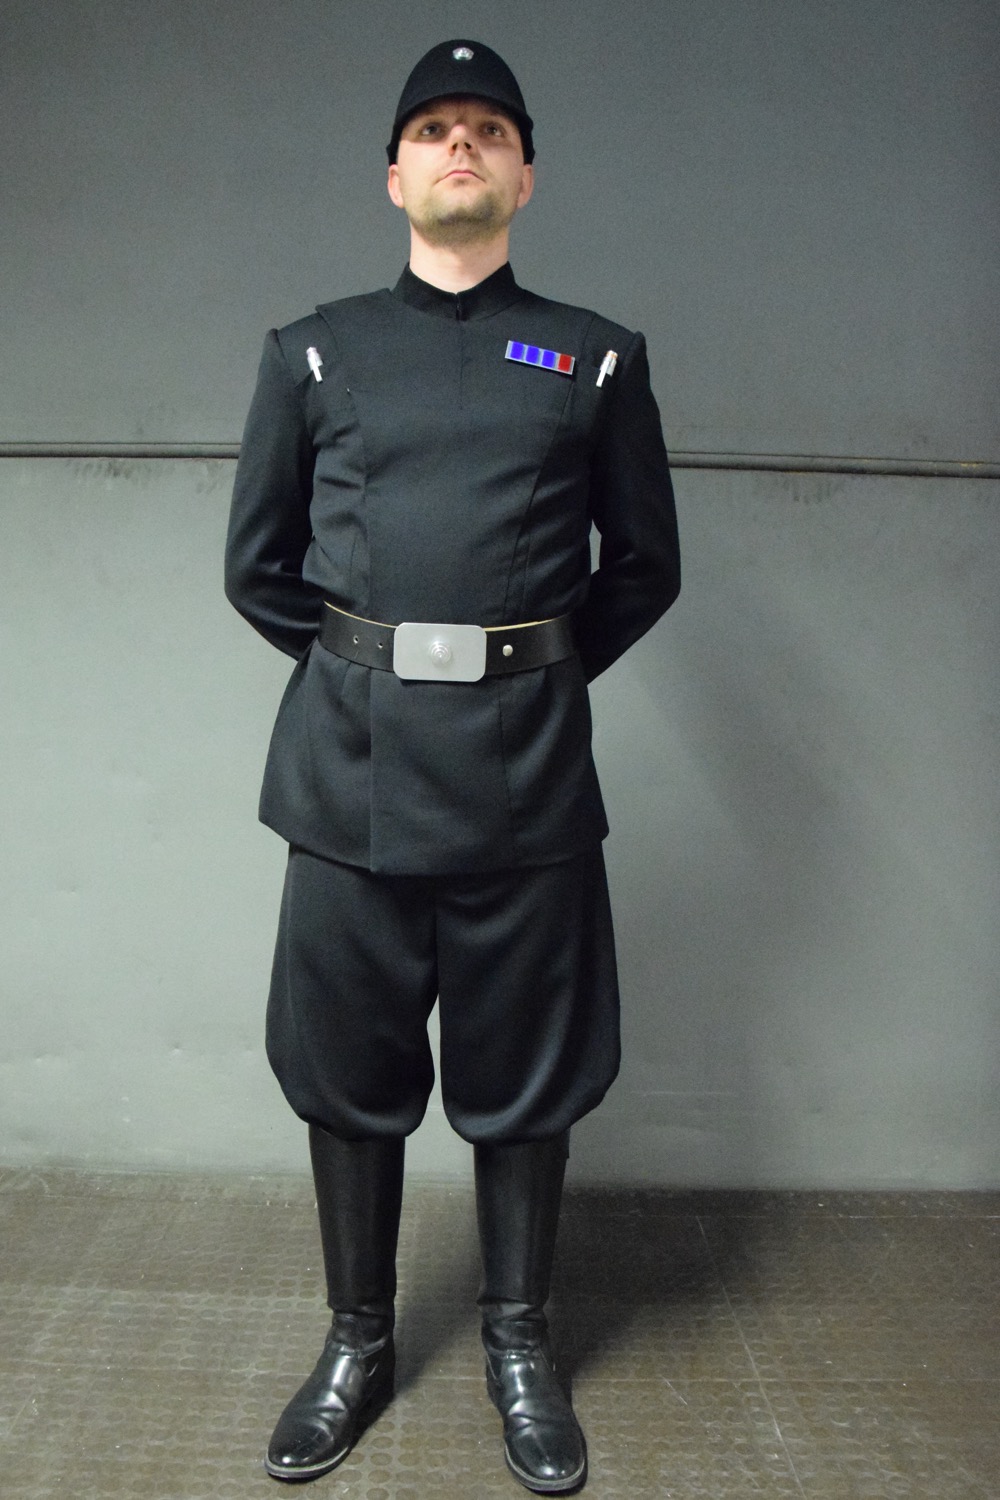 Imperial Officer Star Wars 1, Totale